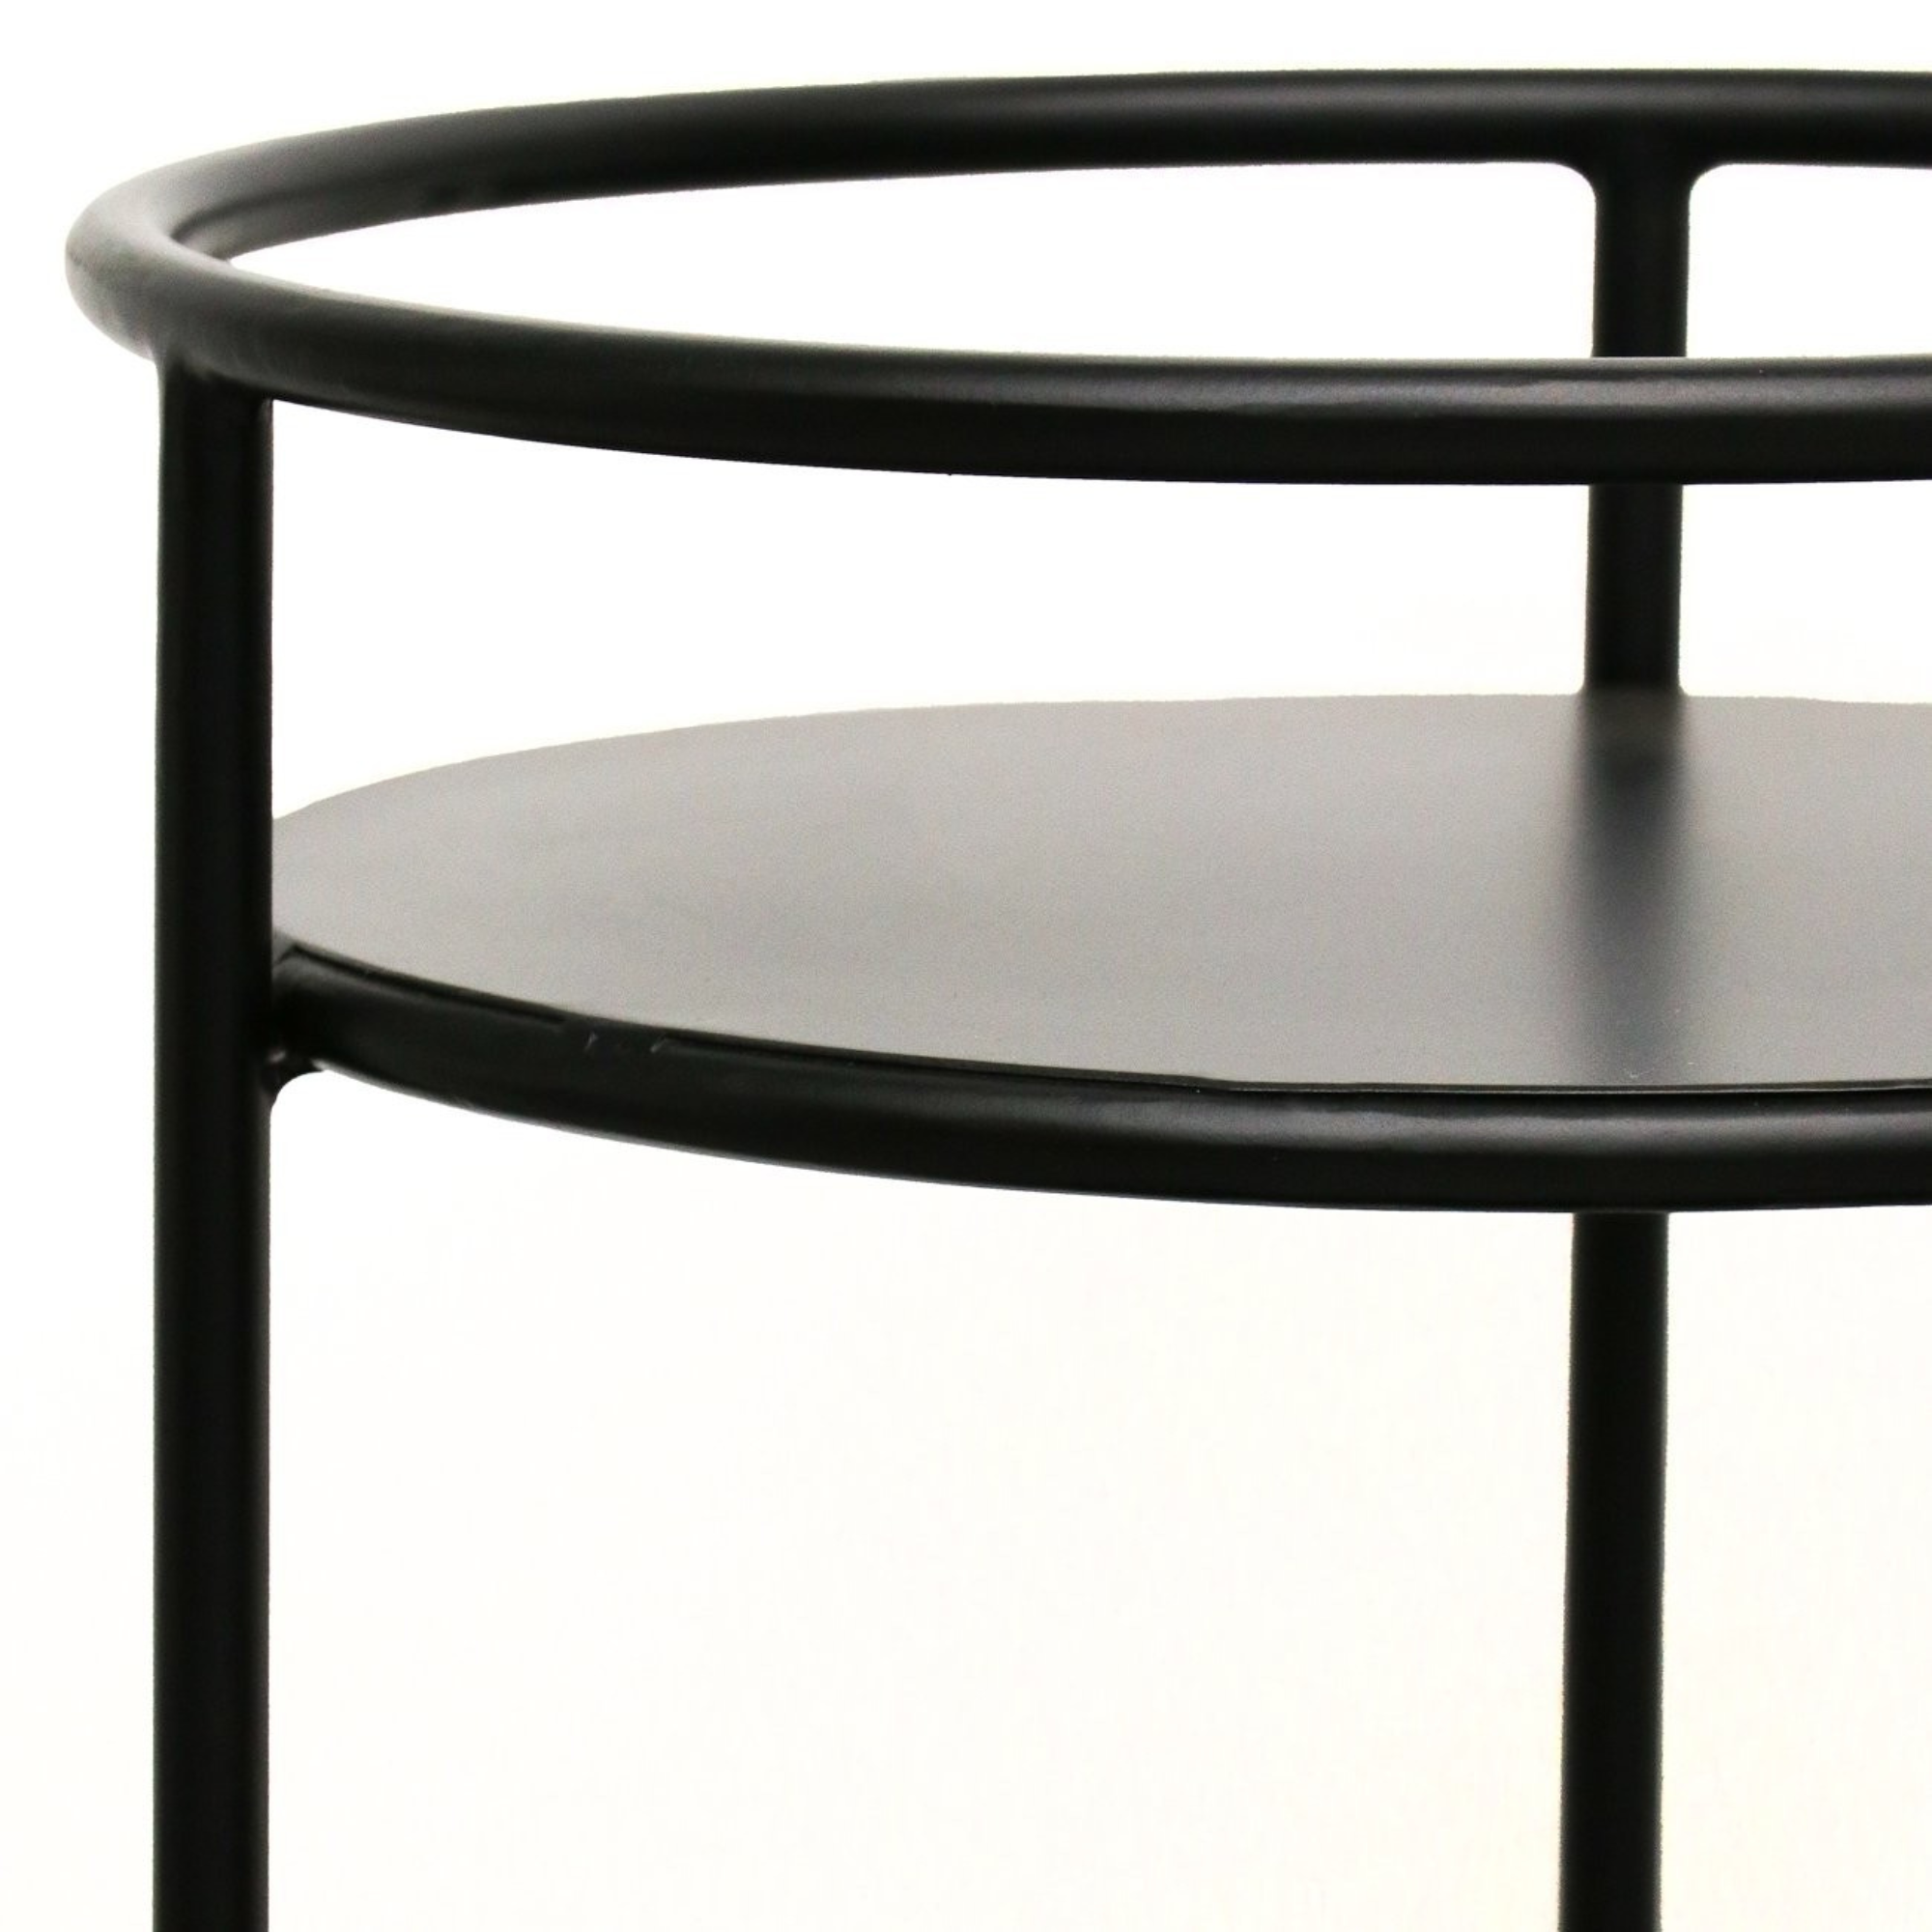 CARSON ROUND SIDE TABLE - 2 TIER